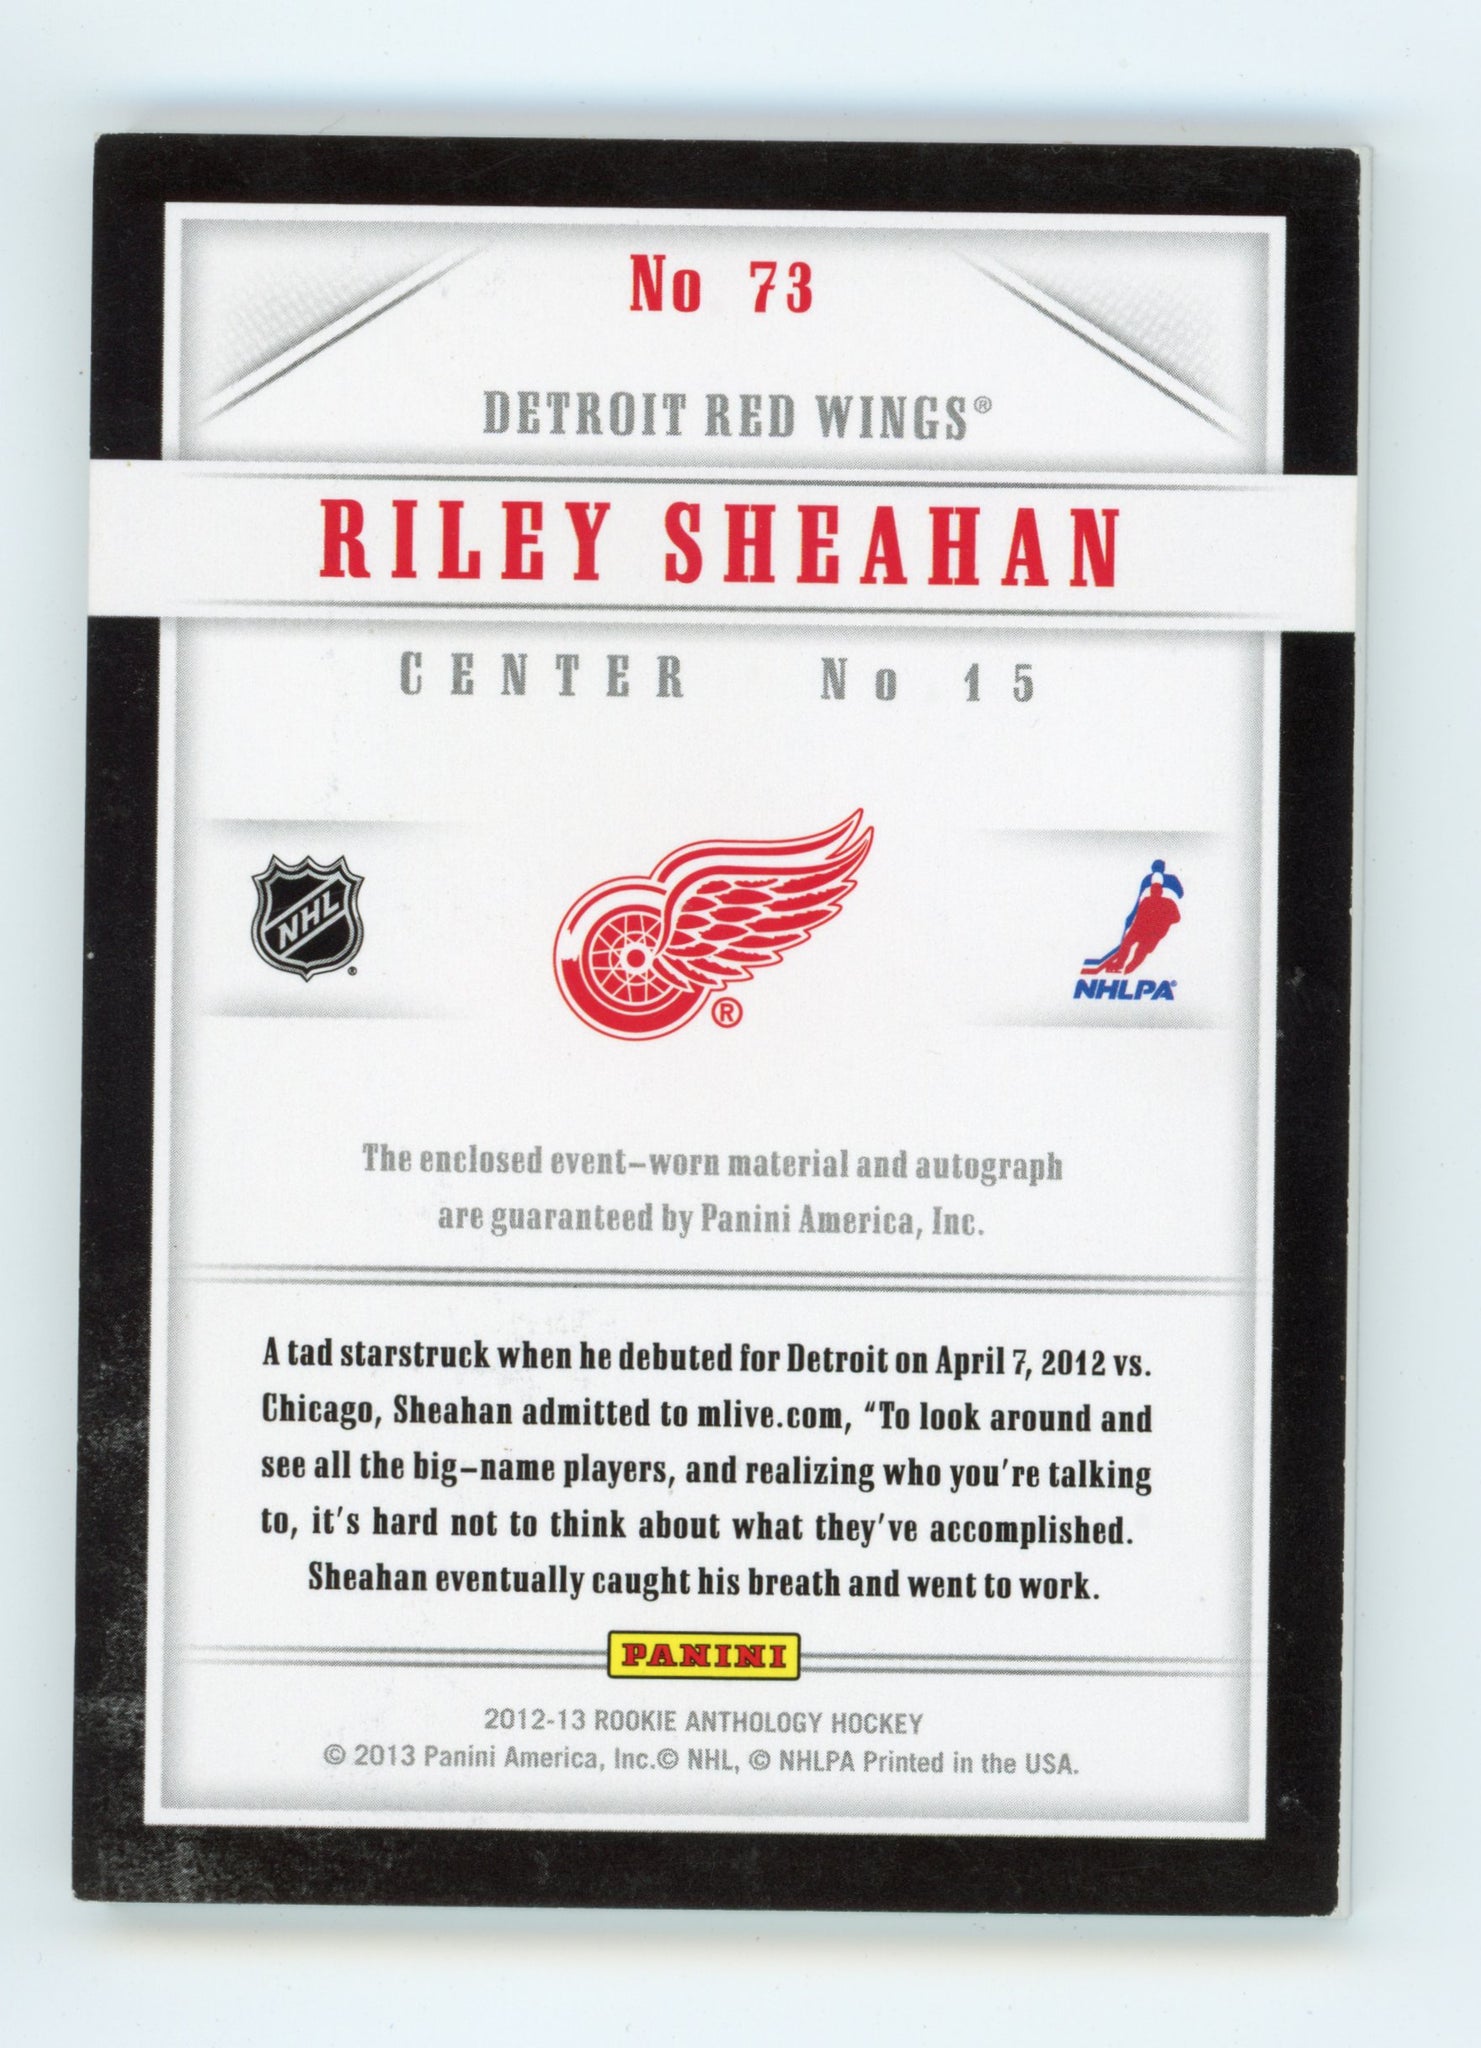 2012-2013 Riley Sheahan Luxury Suite #d /25 Auto Detroit Red Wings # 73